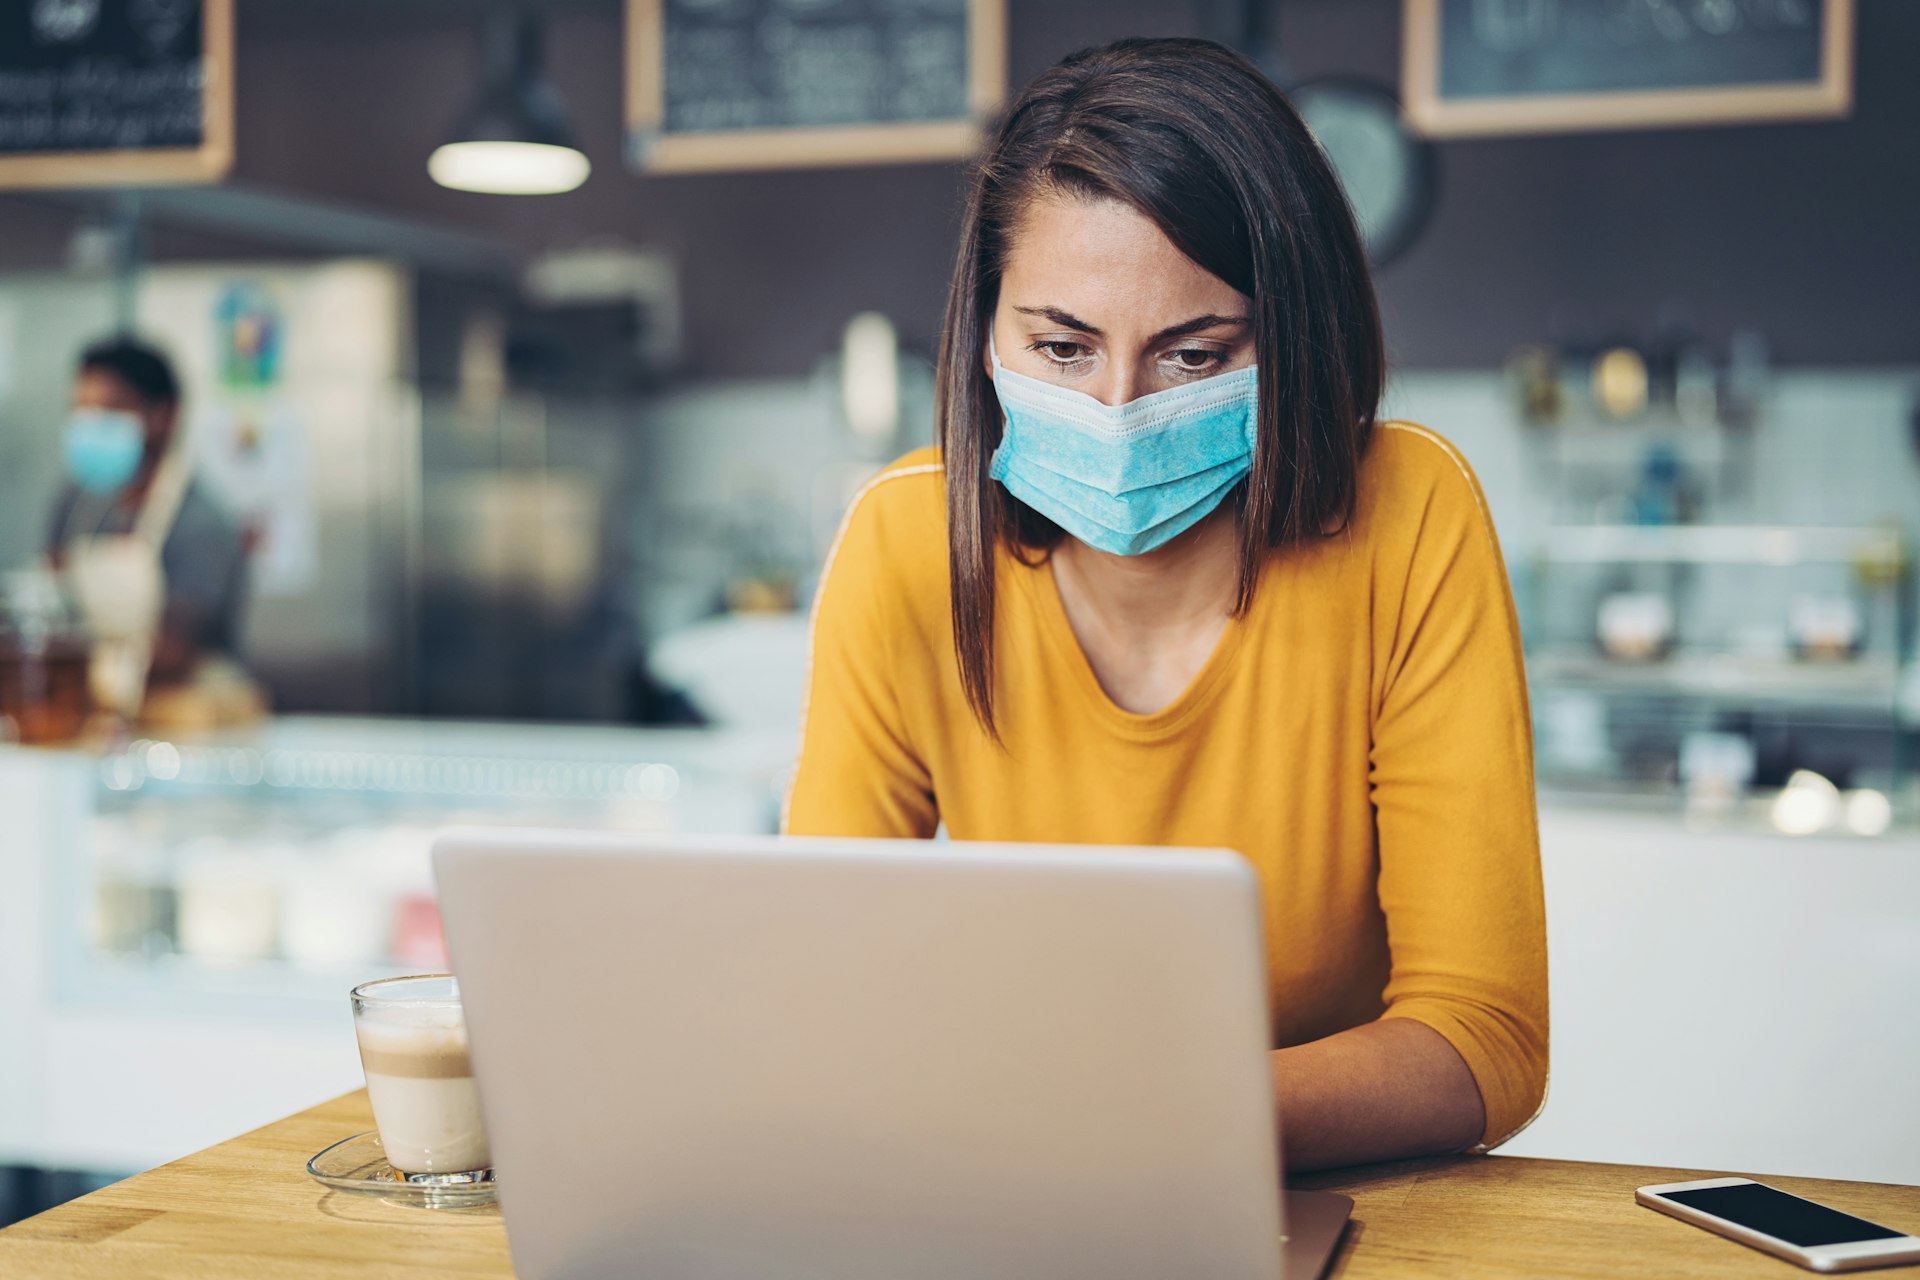 Worried woman with a face mask looking at a laptop